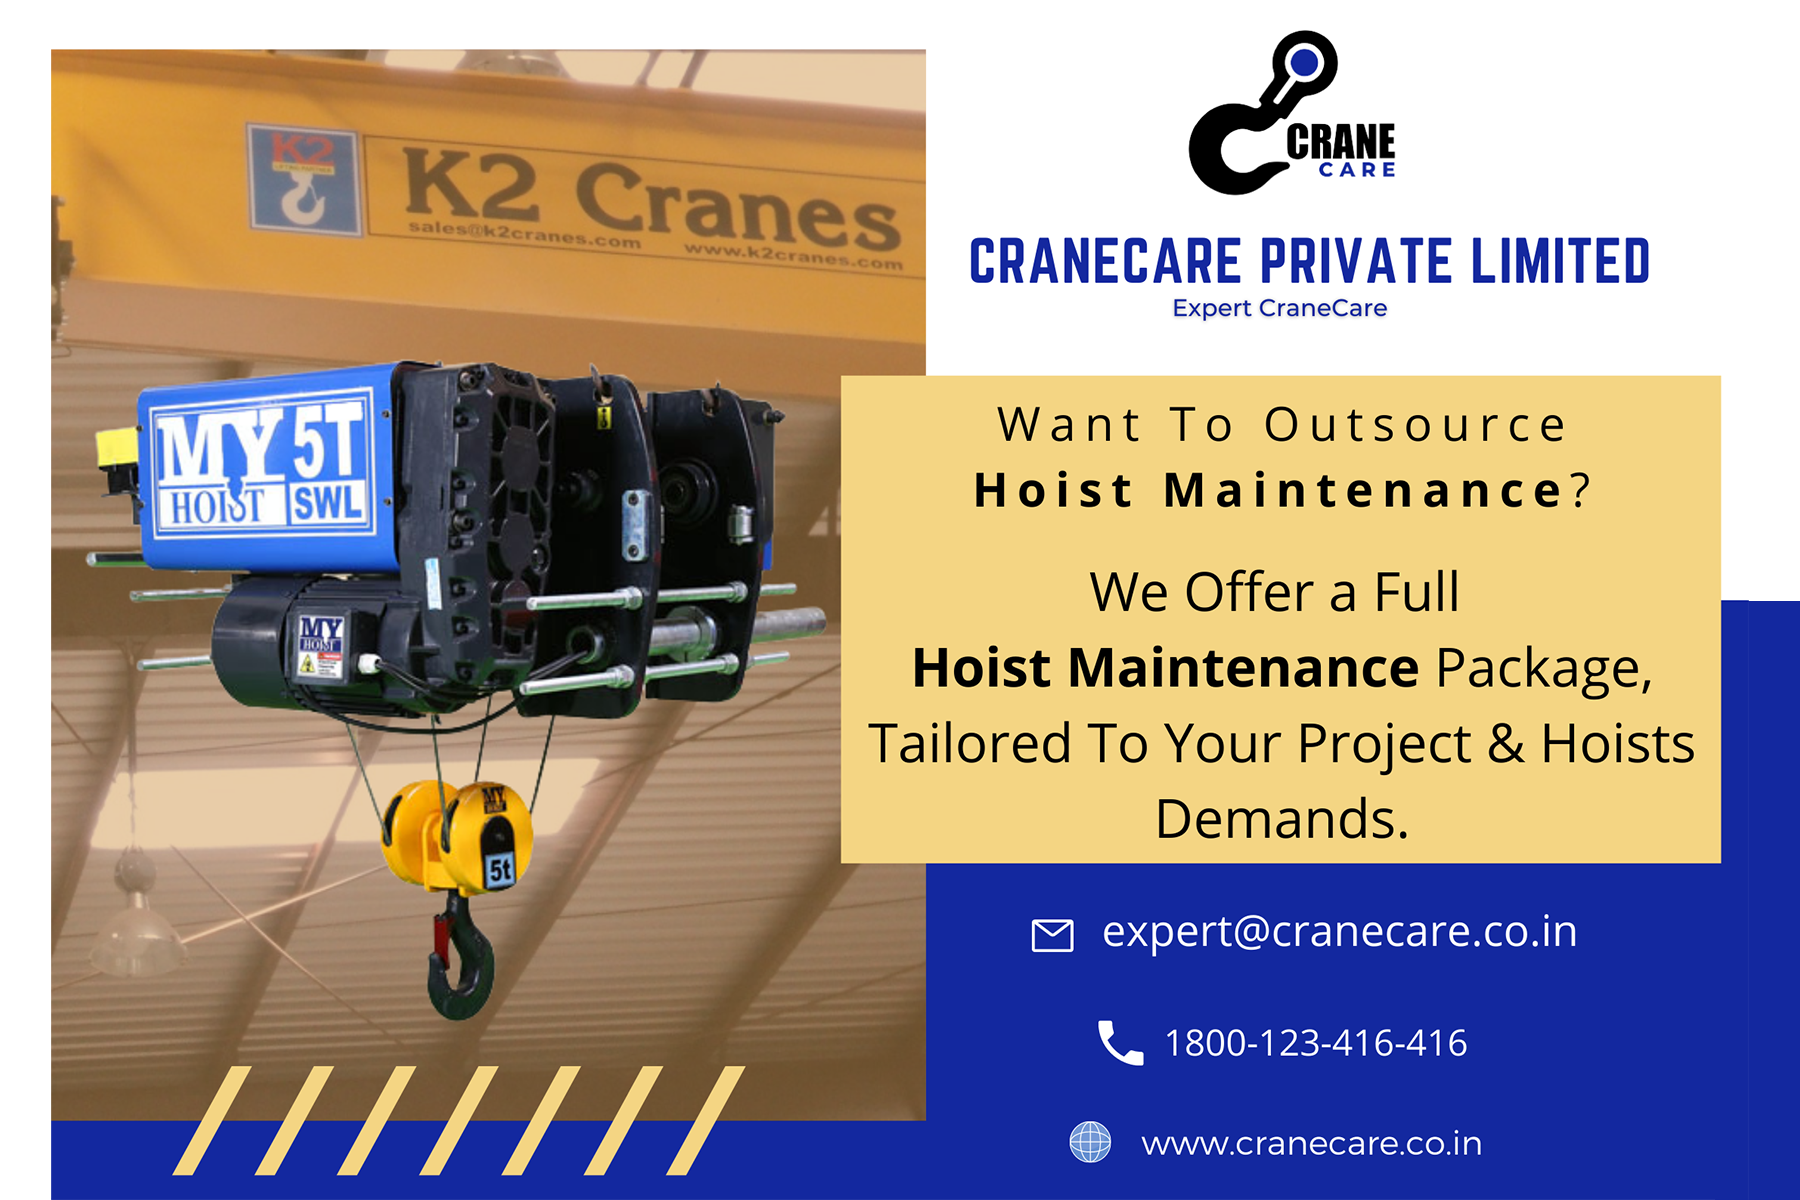 Want To Outsource Hoist Maintenance?